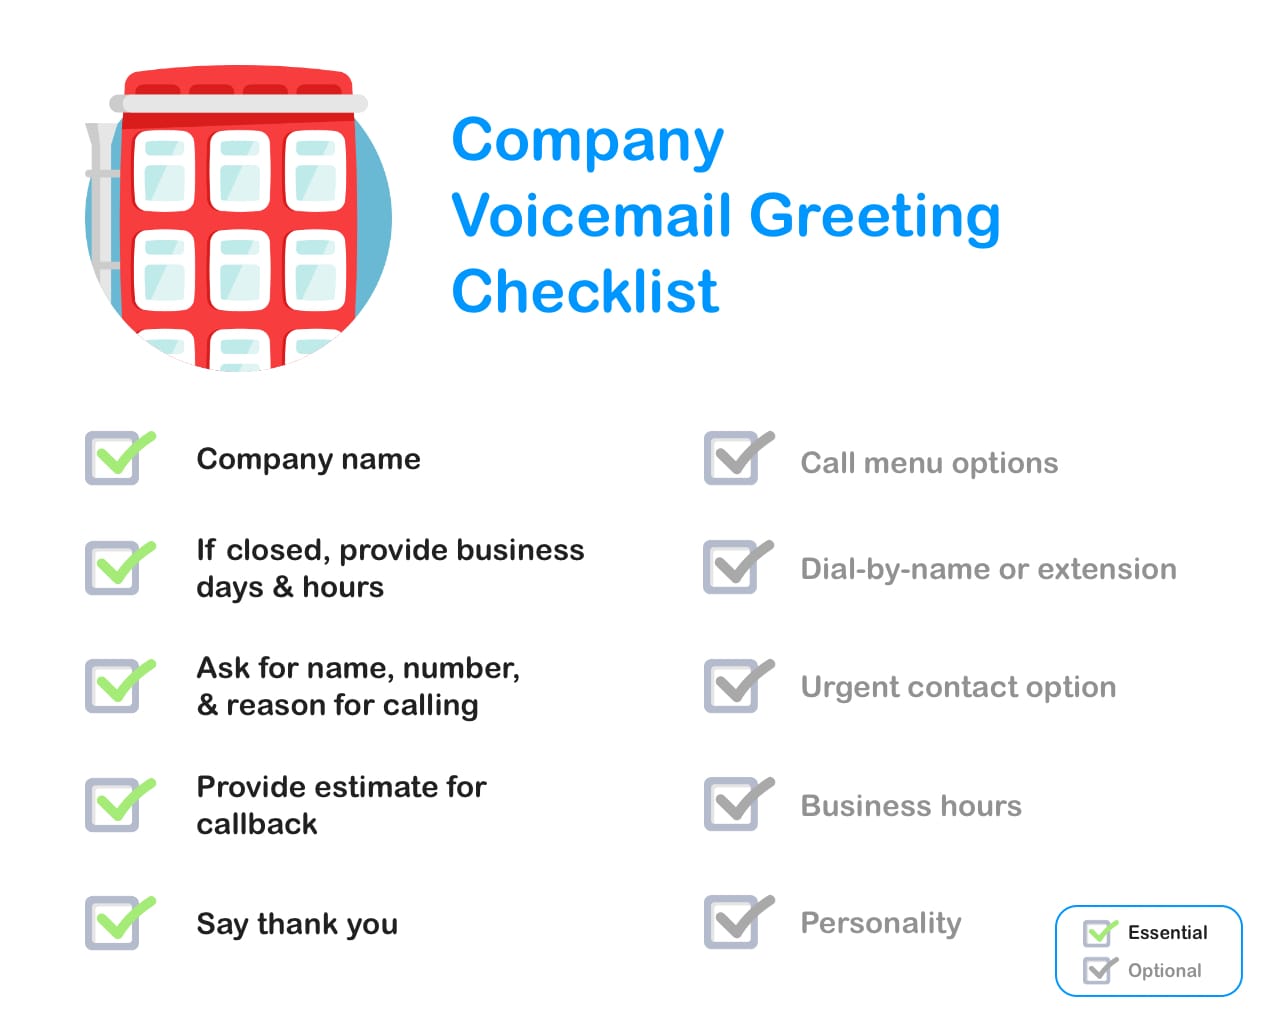 Professional Company Voicemail Greeting Checklist for Small Business